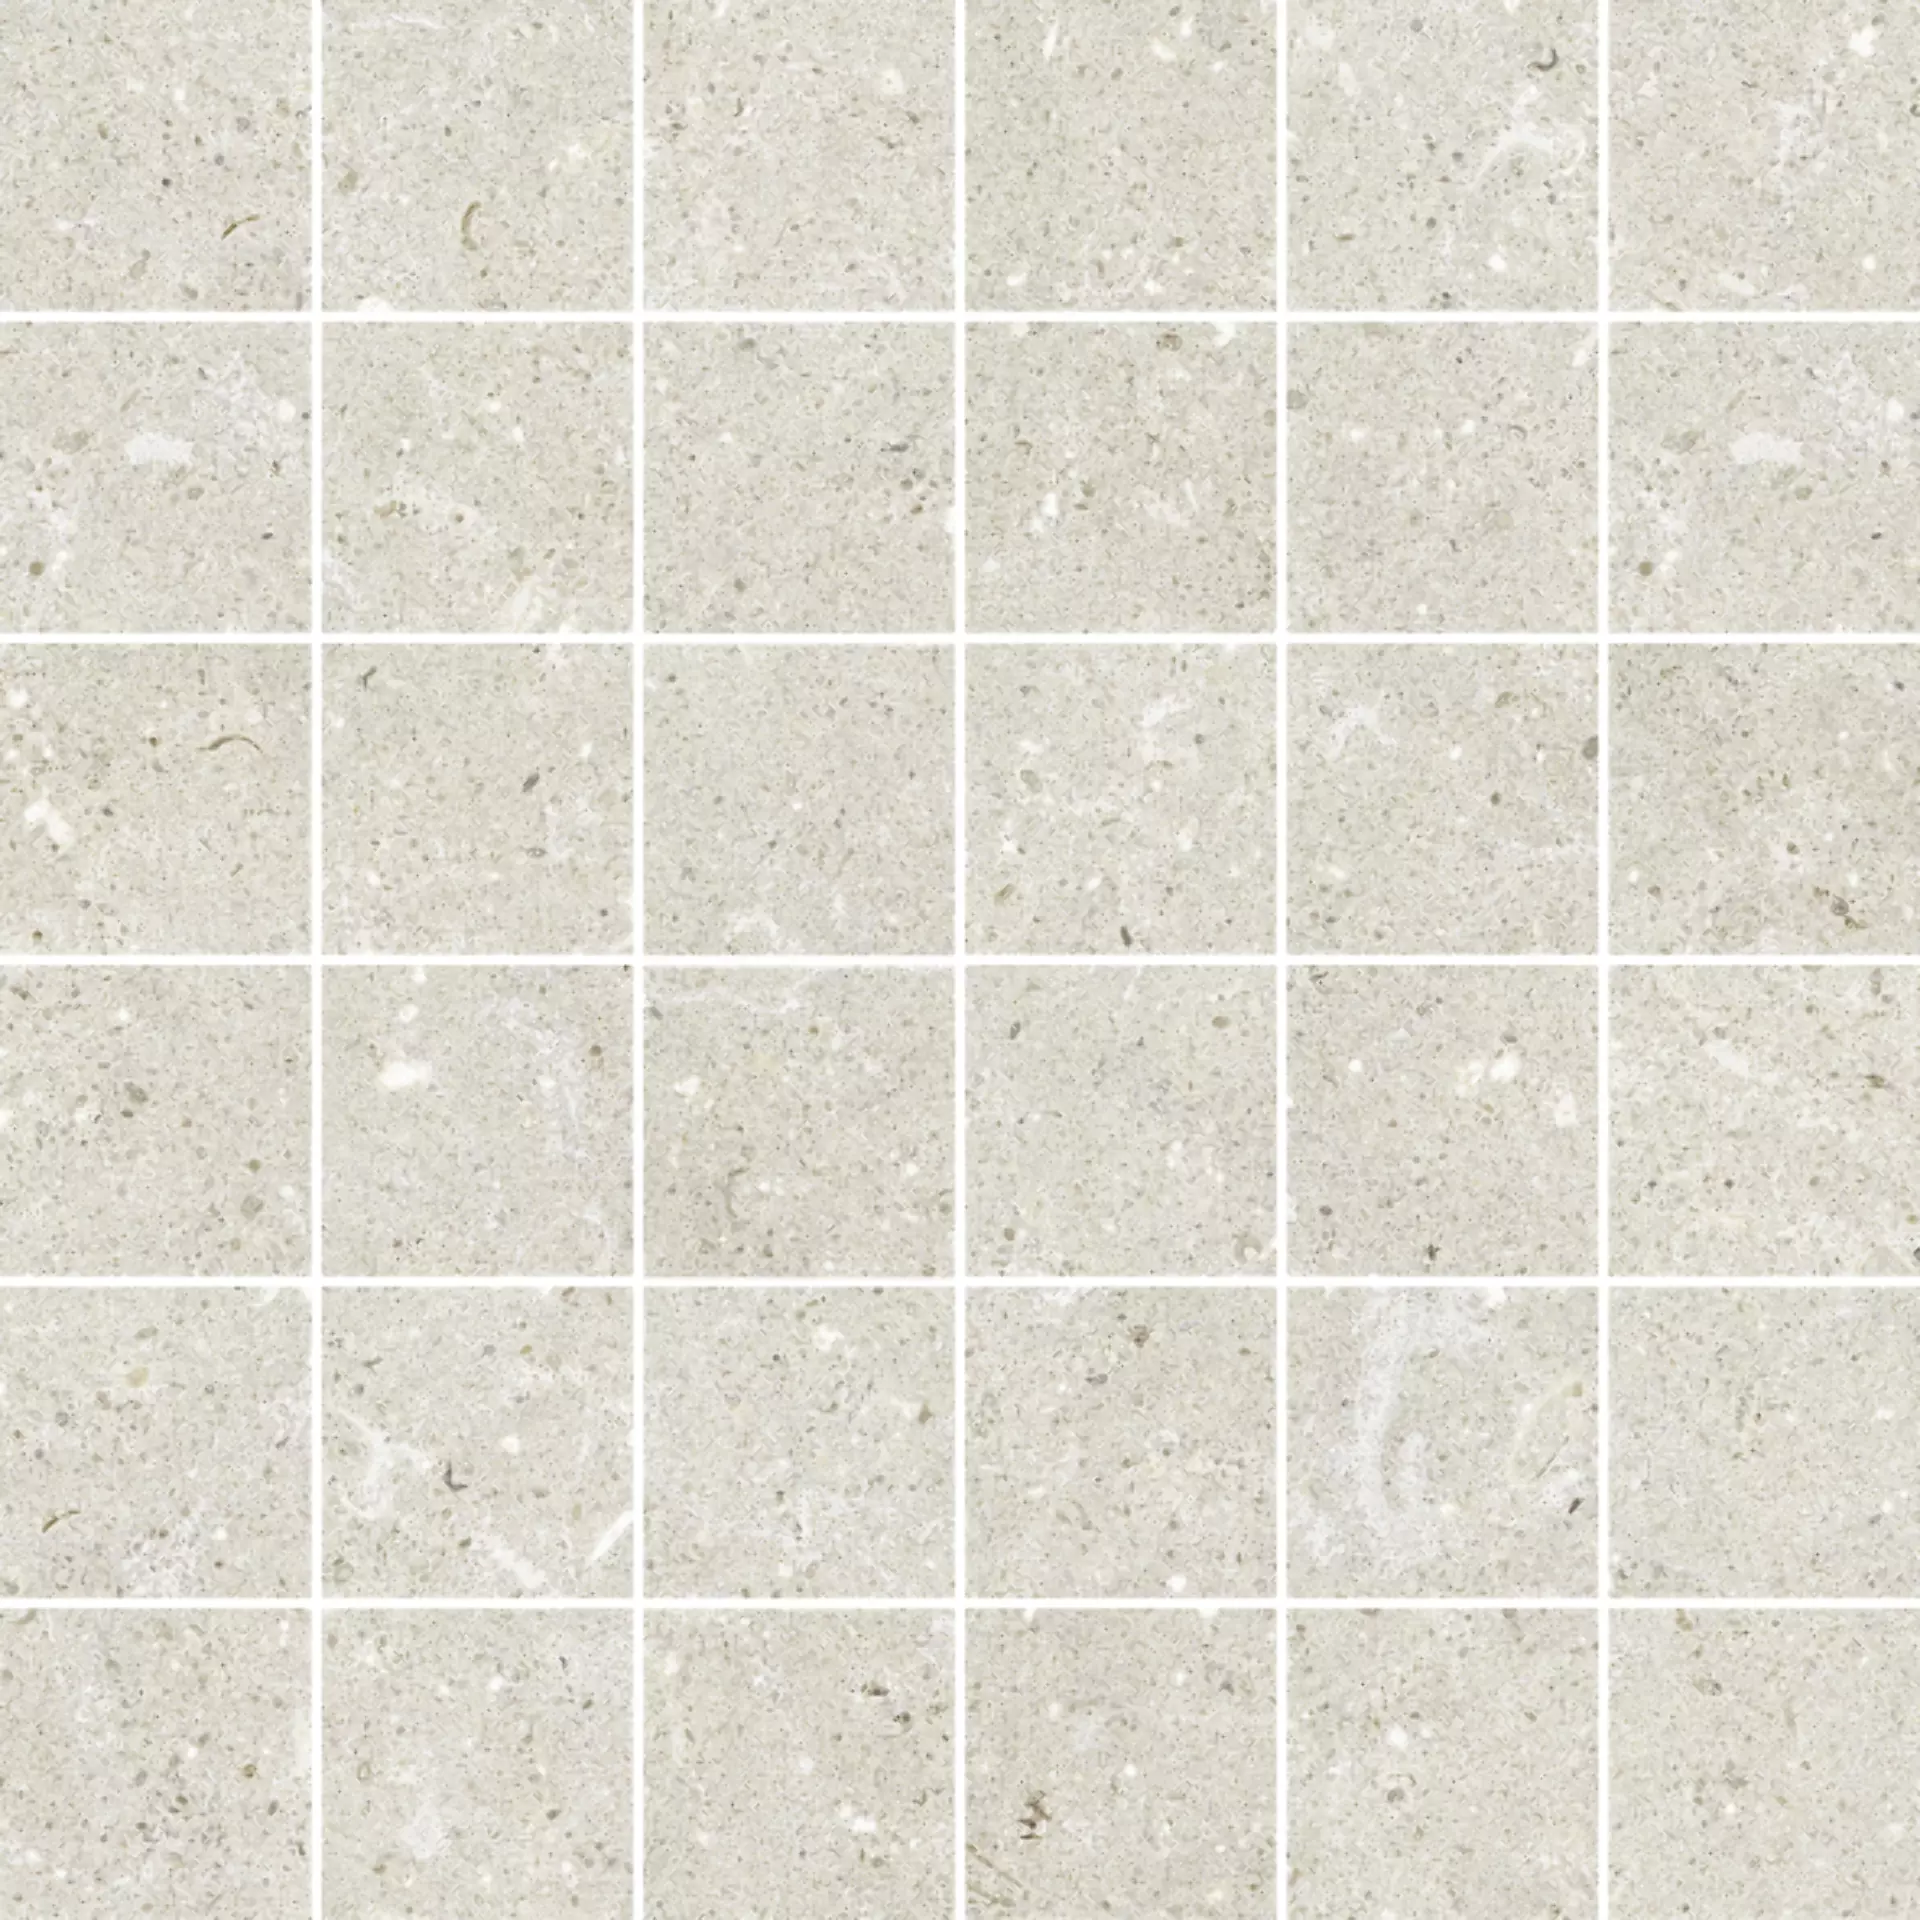 Del Conca Hwd Wild White Hwd Naturale Mosaic G3WD10MO 30x30cm rectified 8,5mm